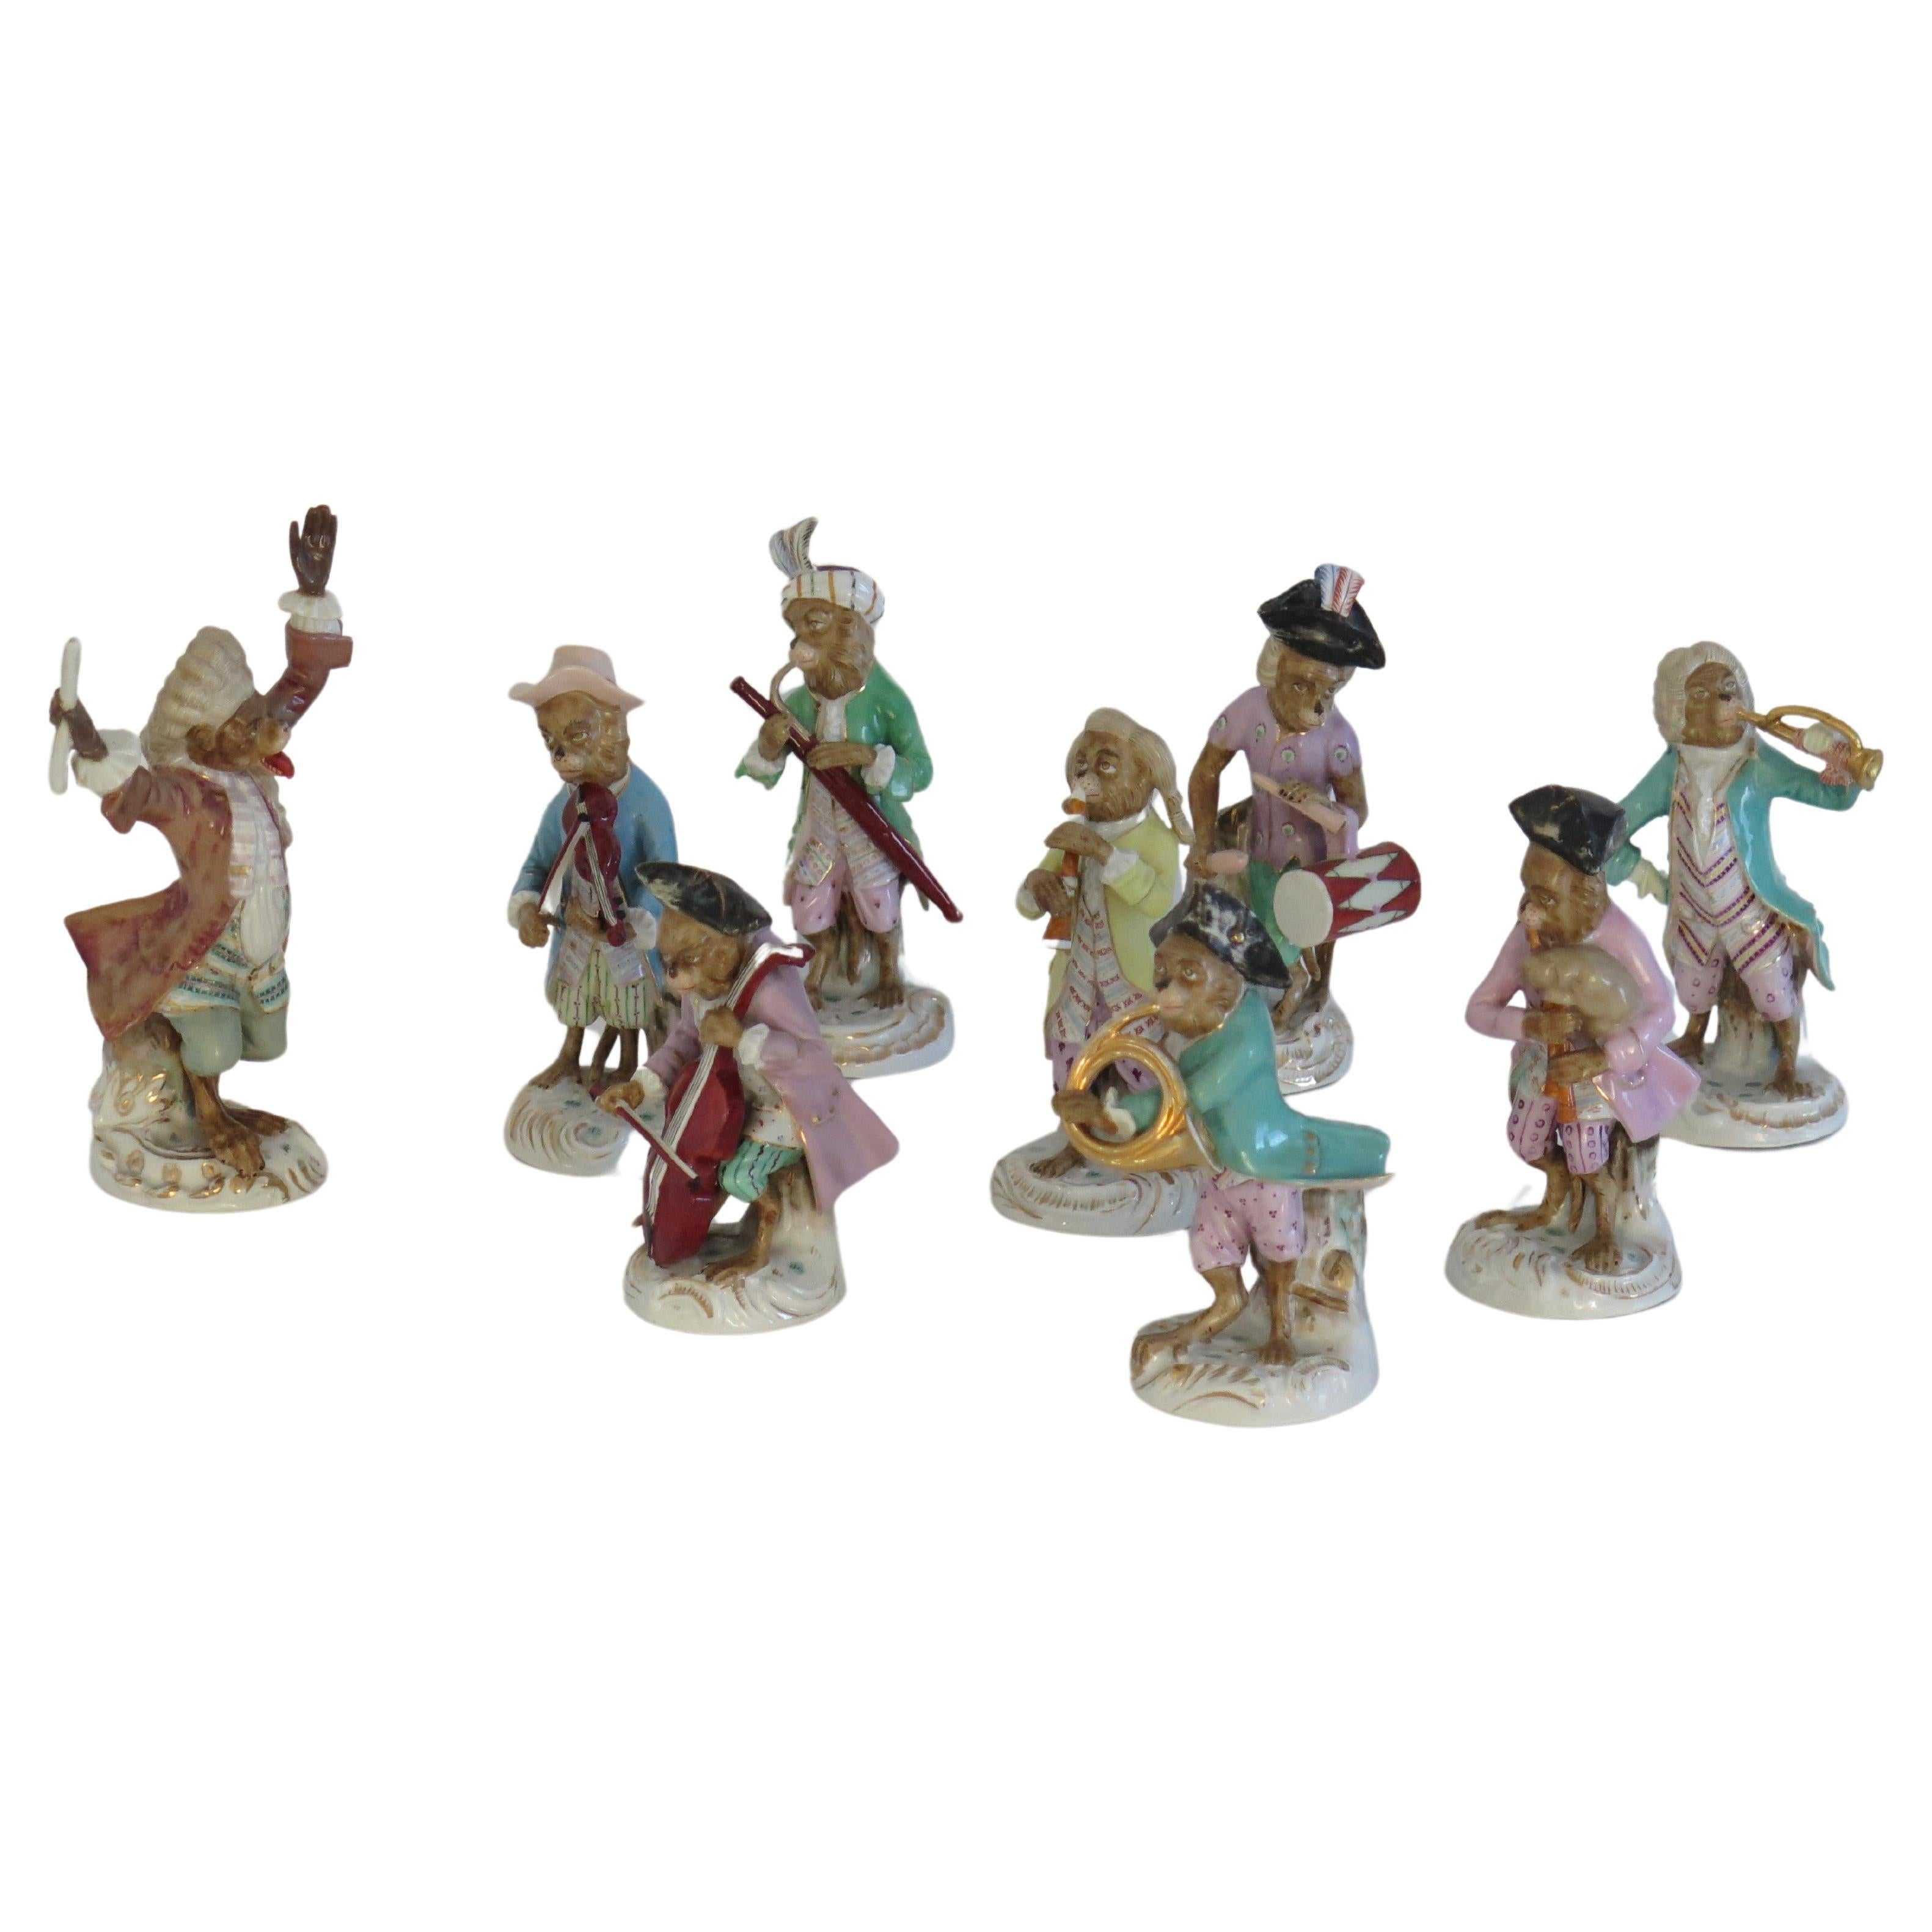 These are a beautiful set of NINE porcelain Monkey Figures or Figurines all playing in a Band  made by Sitzendorf, Germany, circa 1910.

The figures are finely modelled in very good detail. They depict eight different monkey figures plus a band